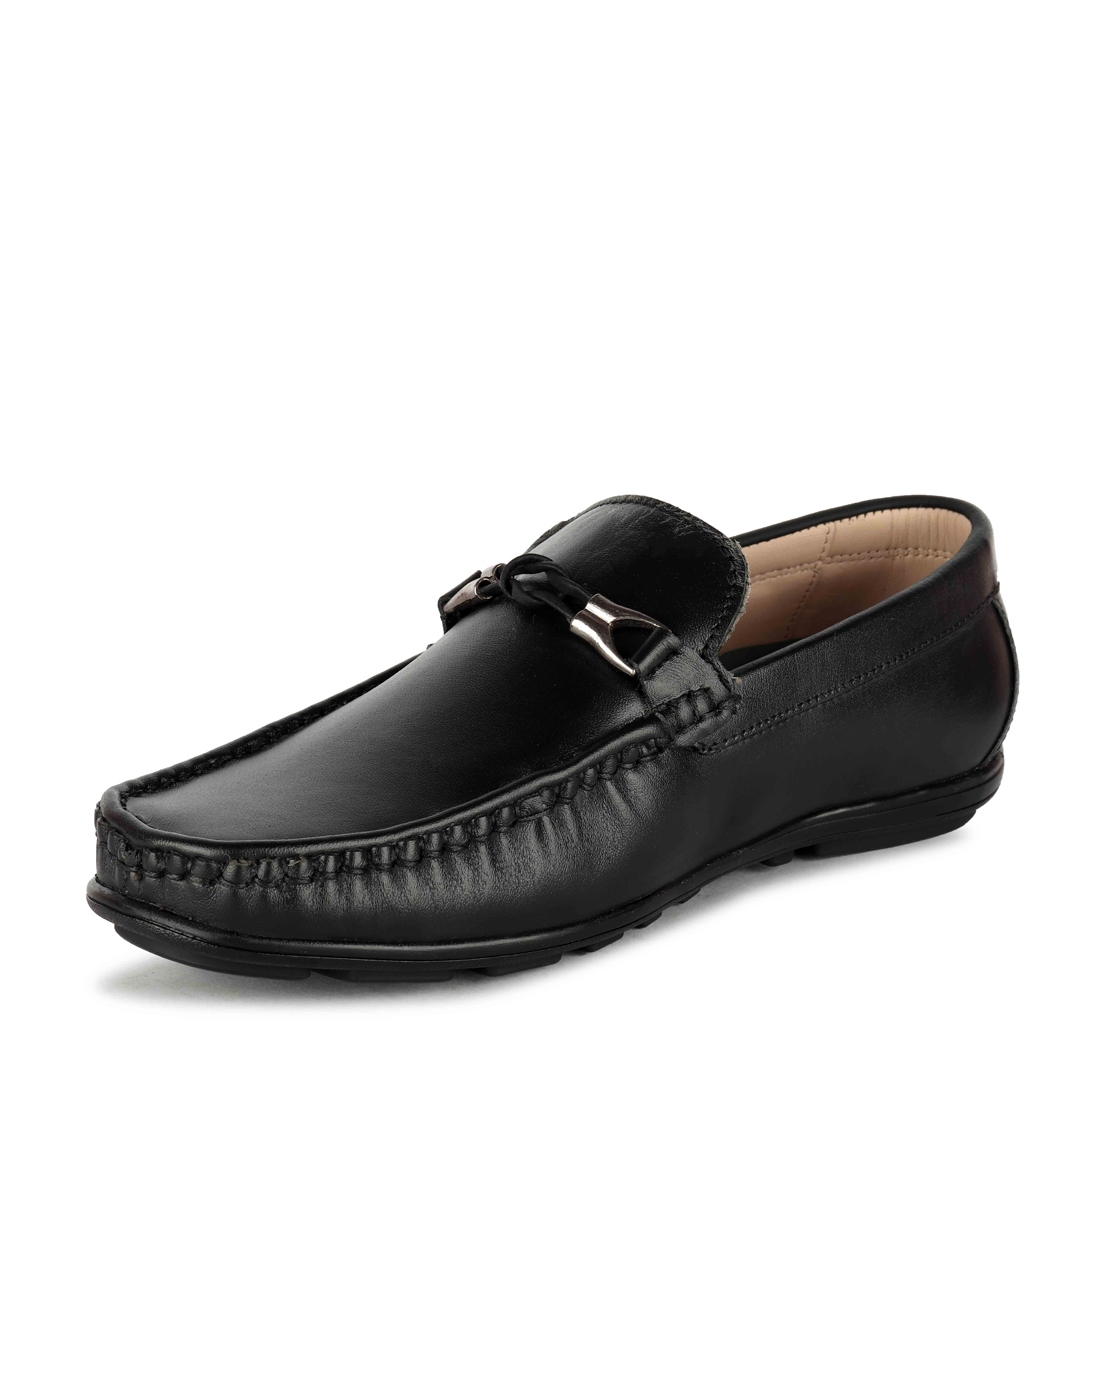 Black Loafers – Buy Black Pure Leather Loafers : Article-231 | Agra ...